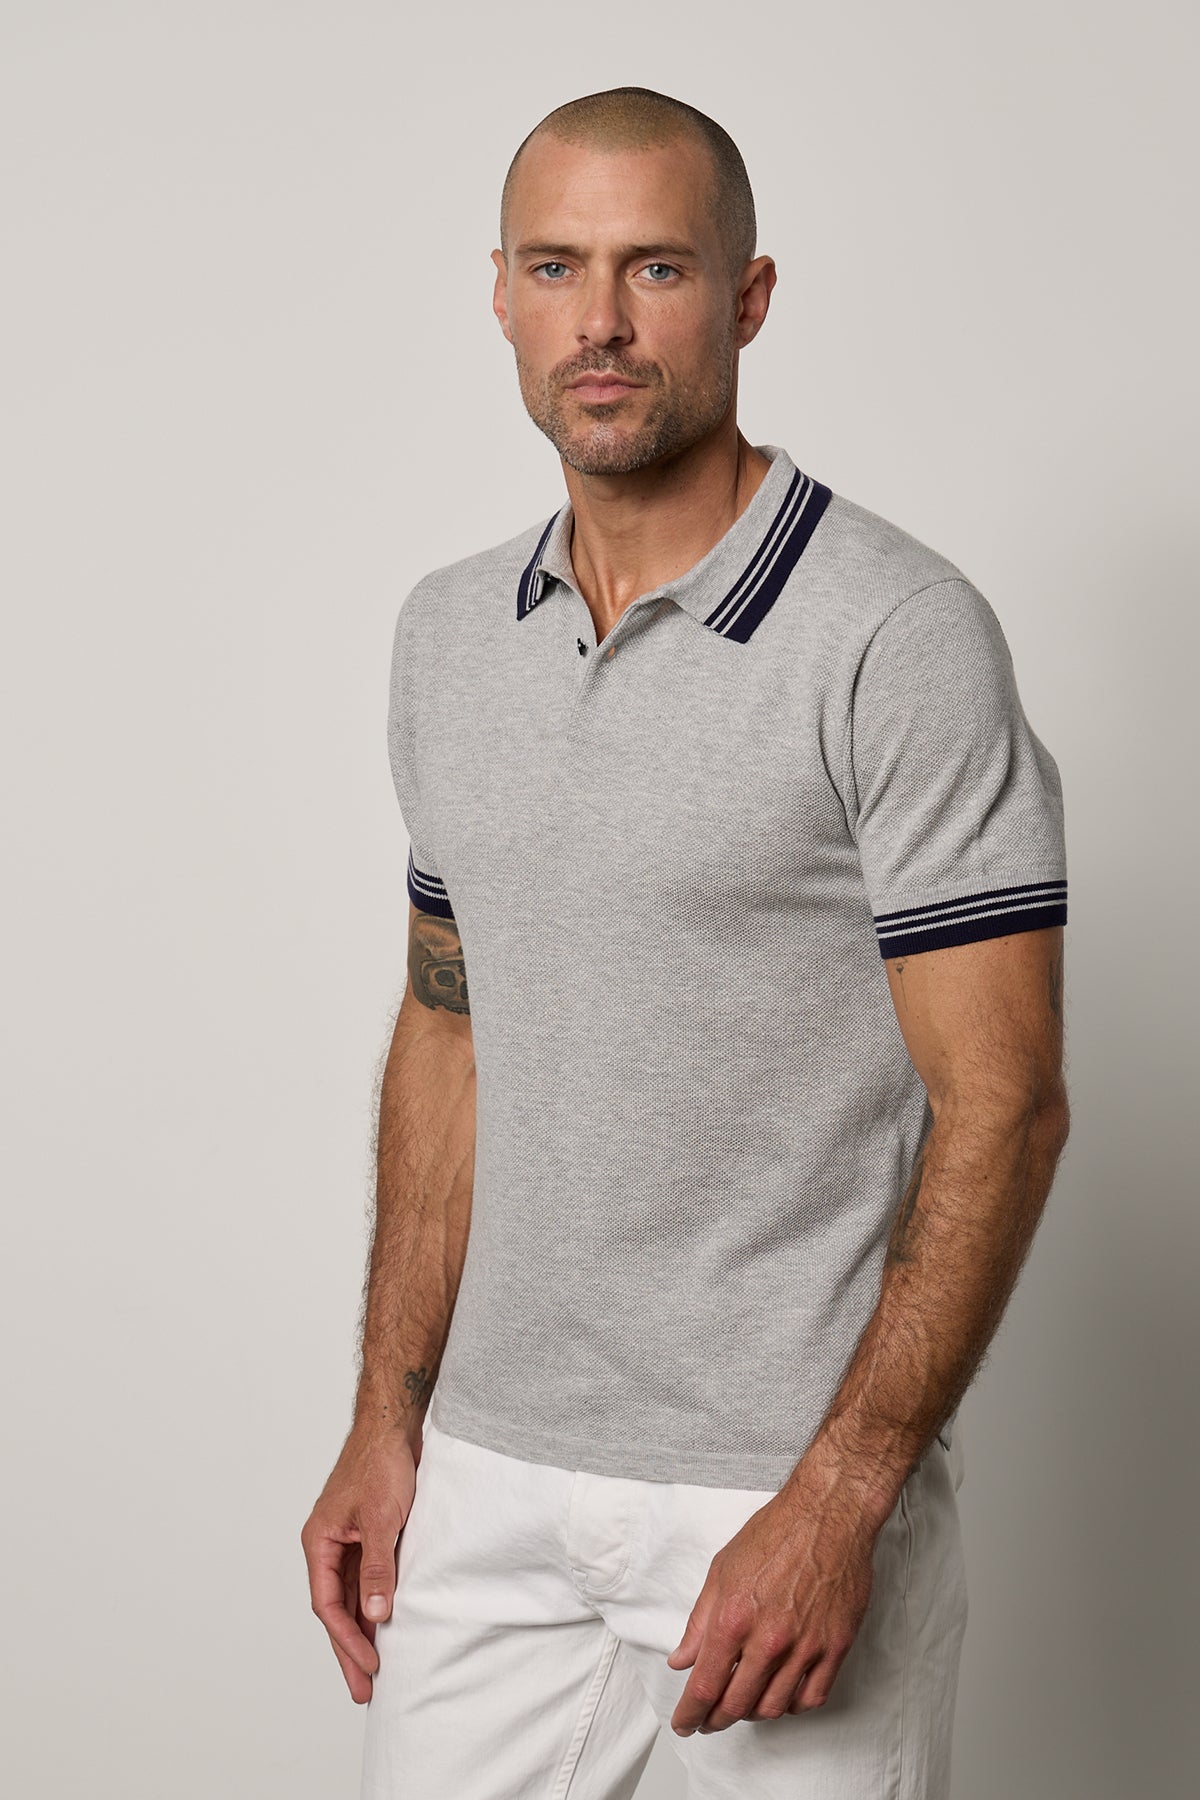 A man wearing a Velvet by Graham & Spencer FINLEY PIQUE POLO, featuring a textured fine ribbing and classic design, is seen in white pants.-26184040251585